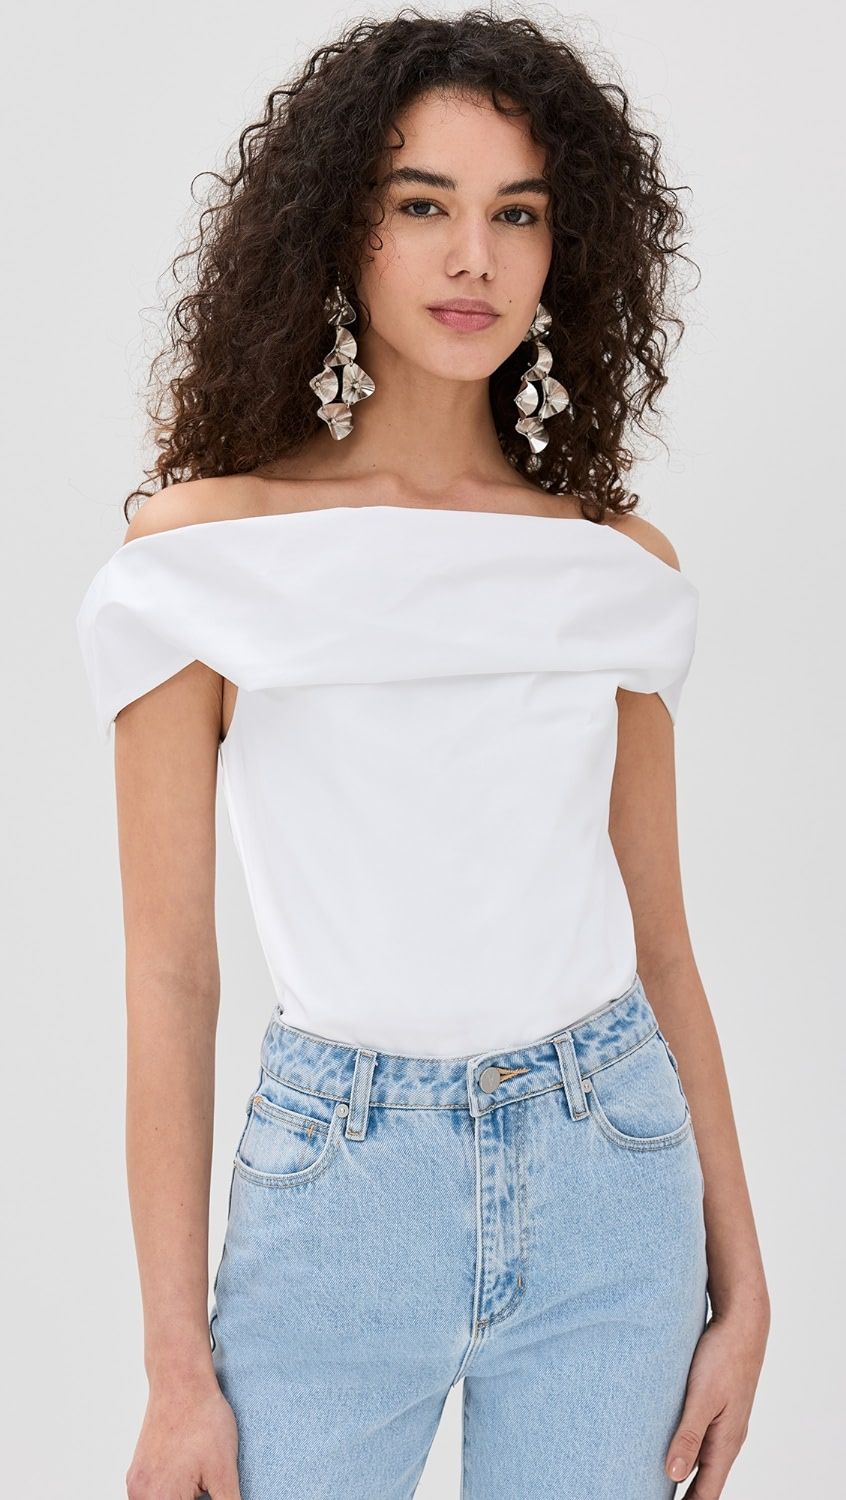 Can't Bare It Top | Shopbop